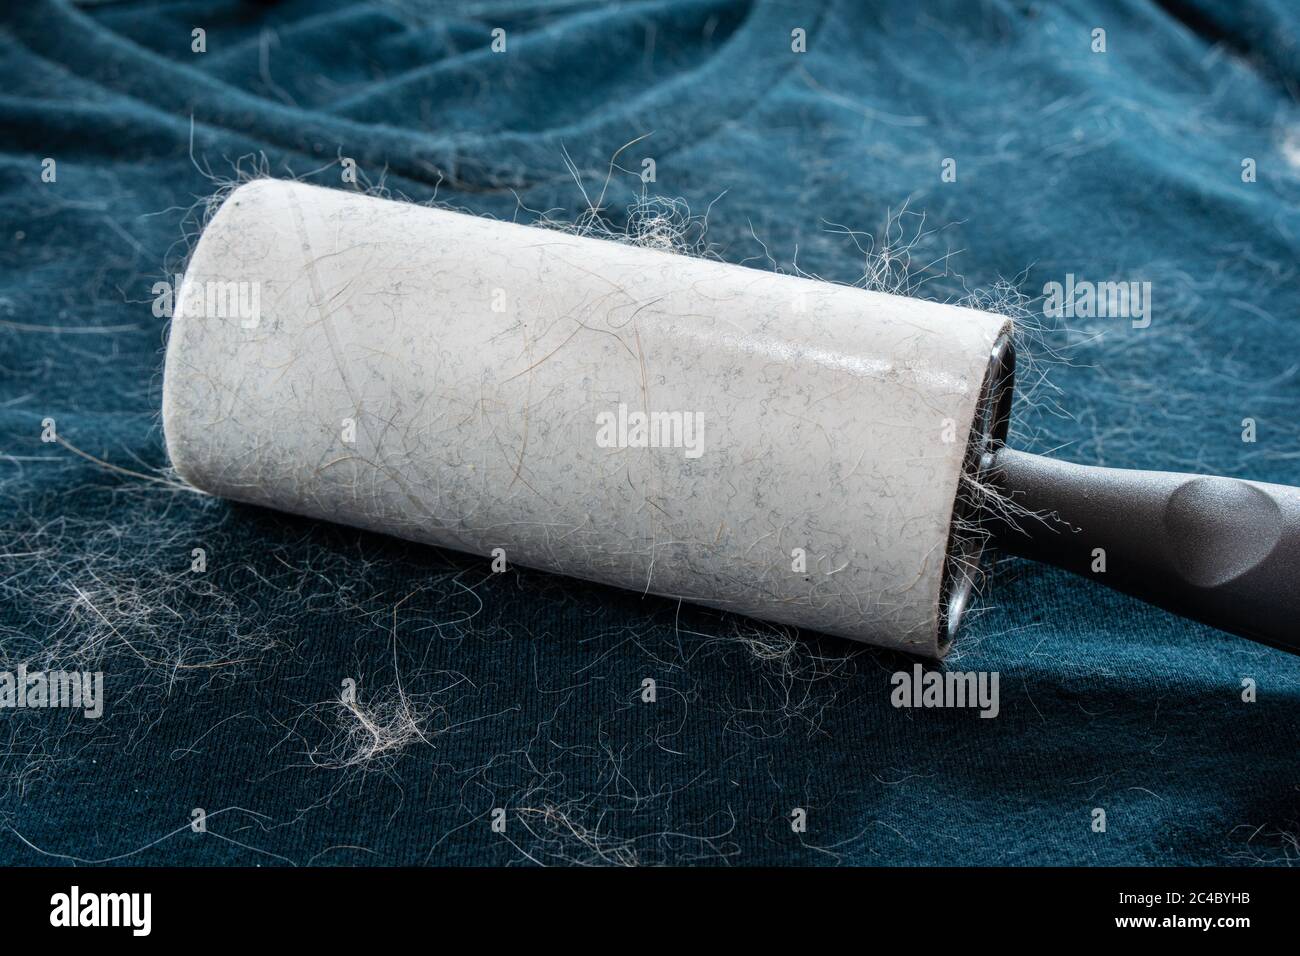 T-shirt covered in cat and dog hair. Lint roller is being used to clean the pet fur from the dirty laundry. Stock Photo